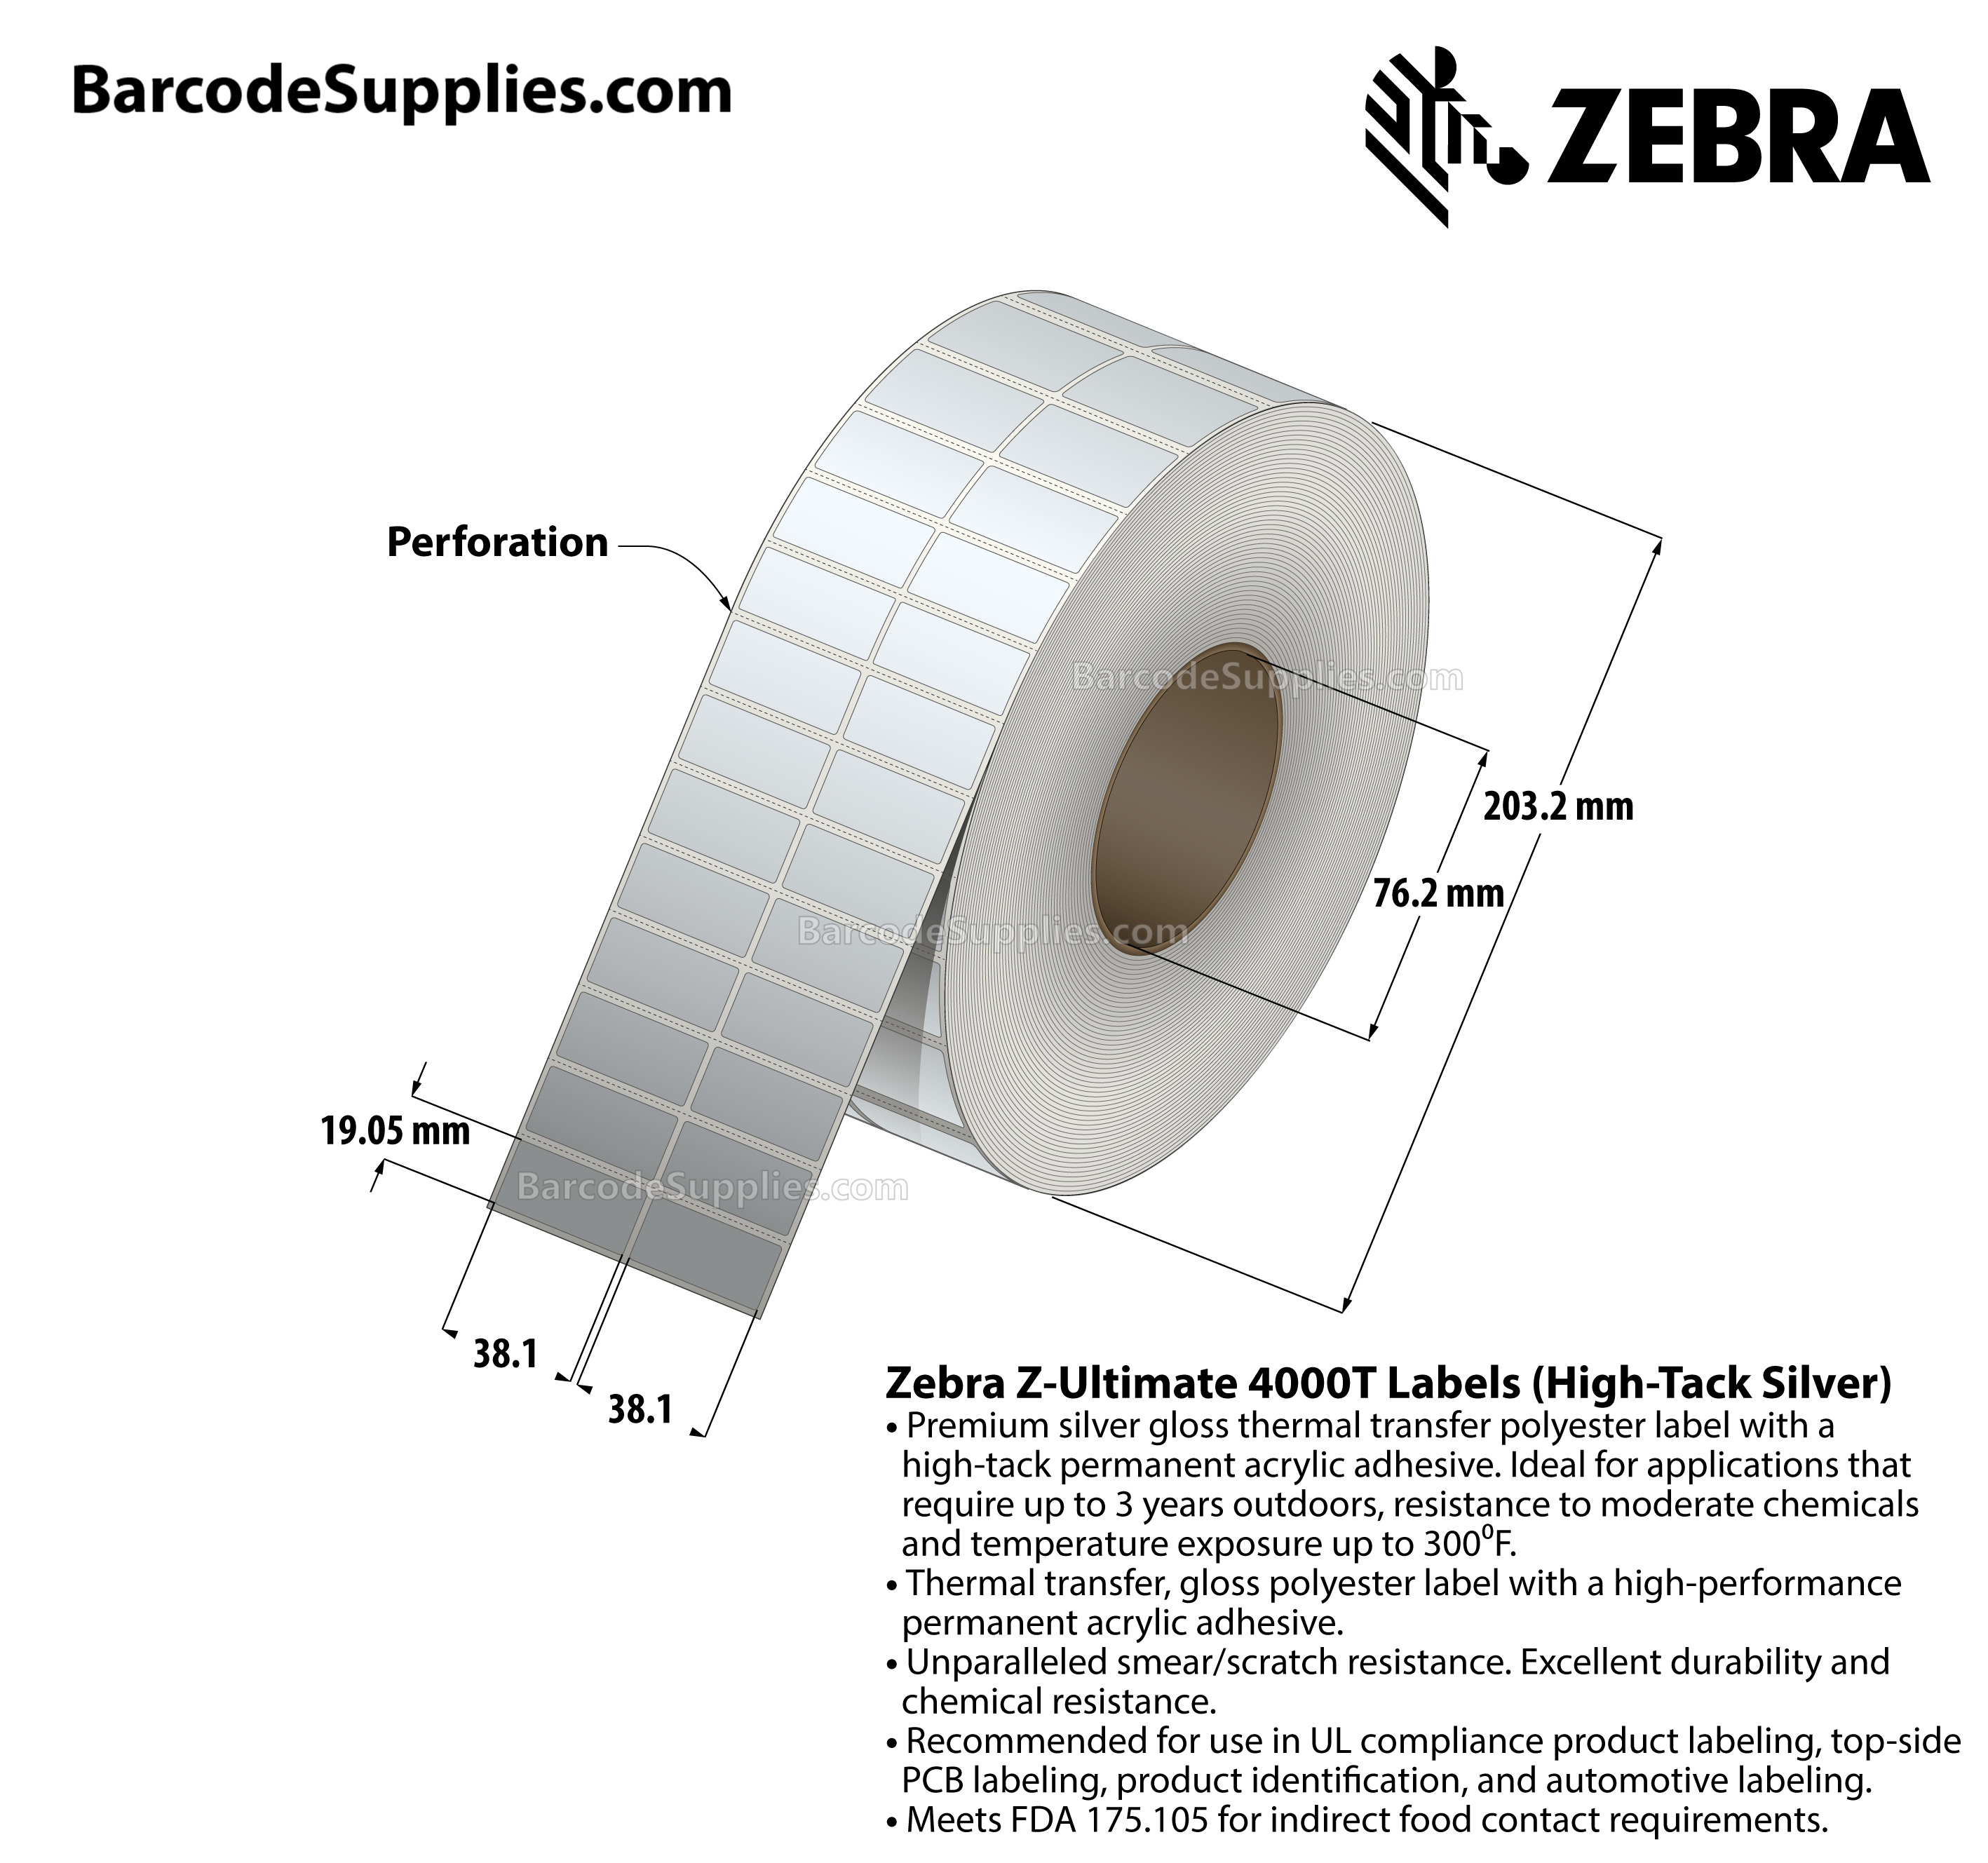 1.5 x 0.75 Thermal Transfer Silver Z-Ultimate 4000T High-Tack Silver (2-Across) Labels With High-tack Adhesive - Perforated - 10000 Labels Per Roll - Carton Of 1 Rolls - 10000 Labels Total - MPN: 10023350